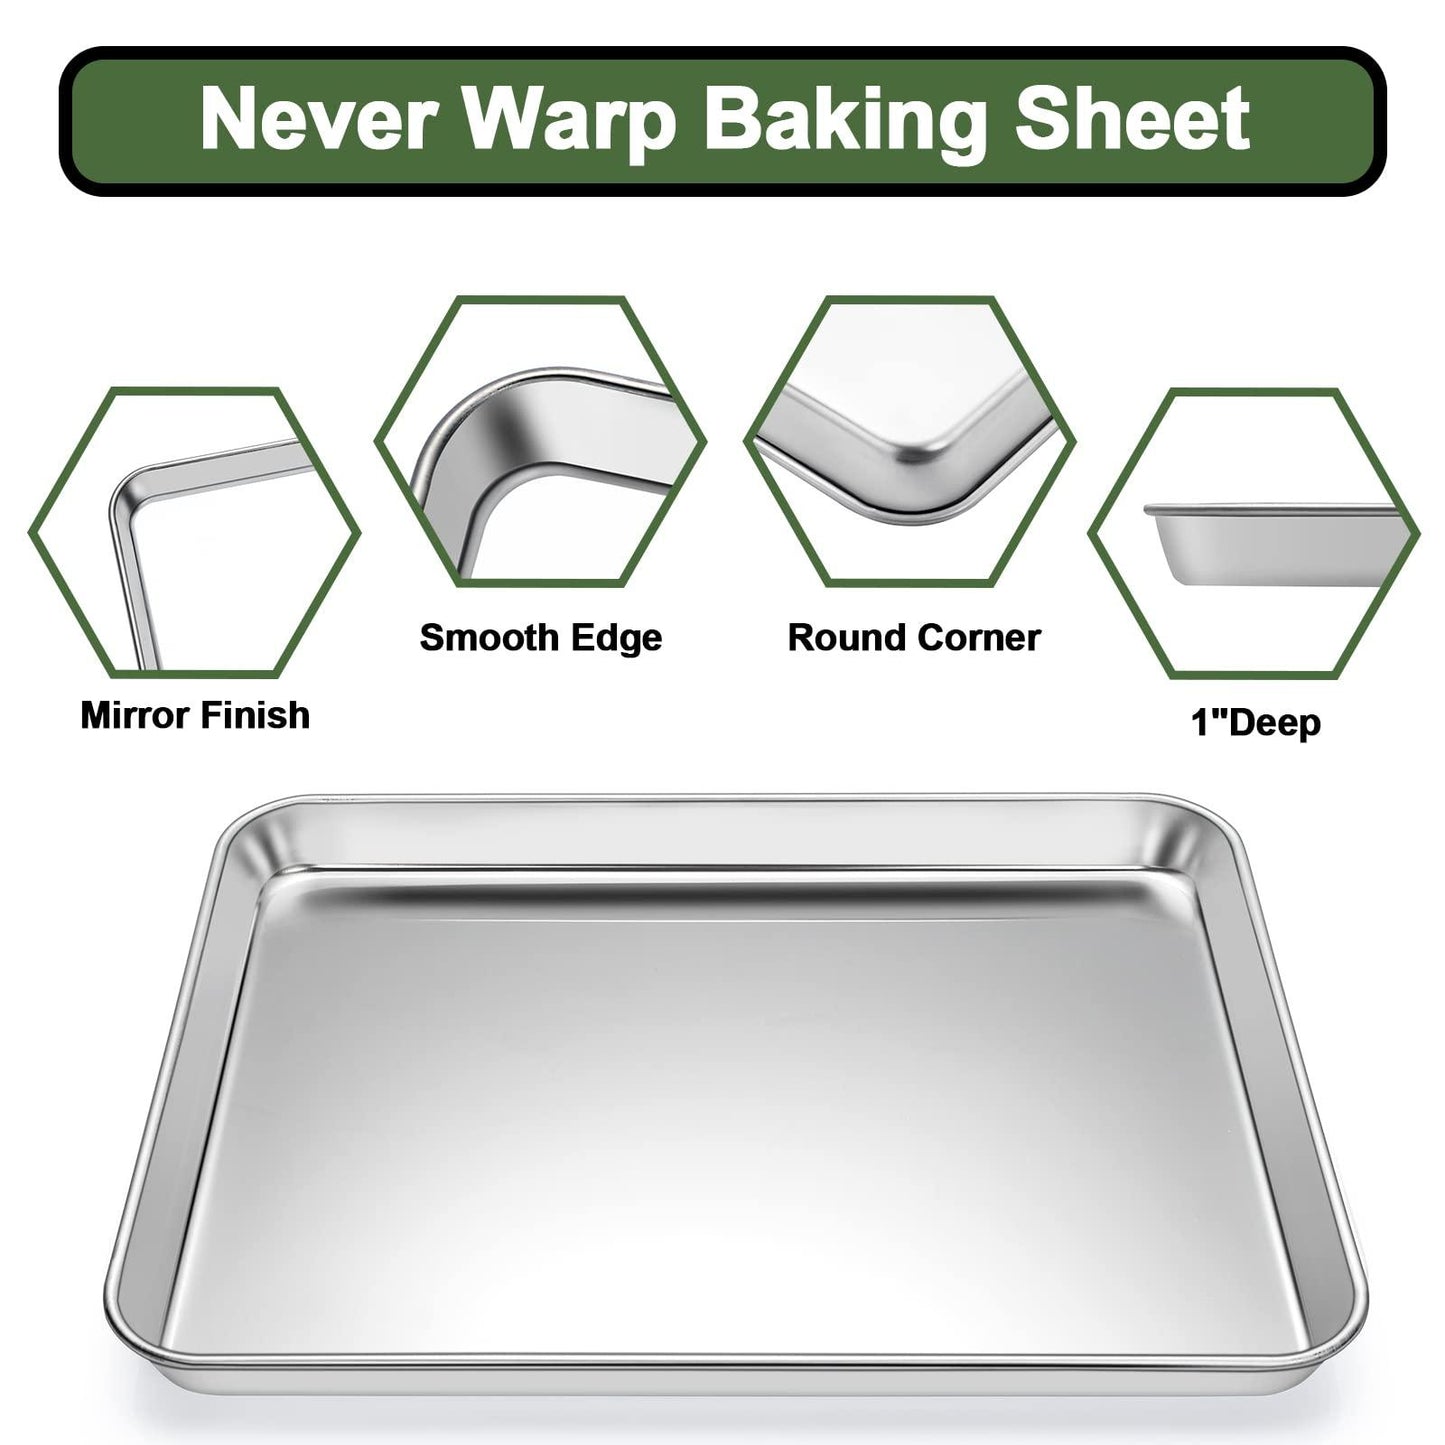 Baking Sheet Tray Cooling Rack with Silicone Mat Set, Stainless Steel Cookie Pan For Oven, Set of 9 (3 Sheets + 3 Racks Mats), Warp Resistant & Heavy Duty Easy Clean, Grey - CookCave